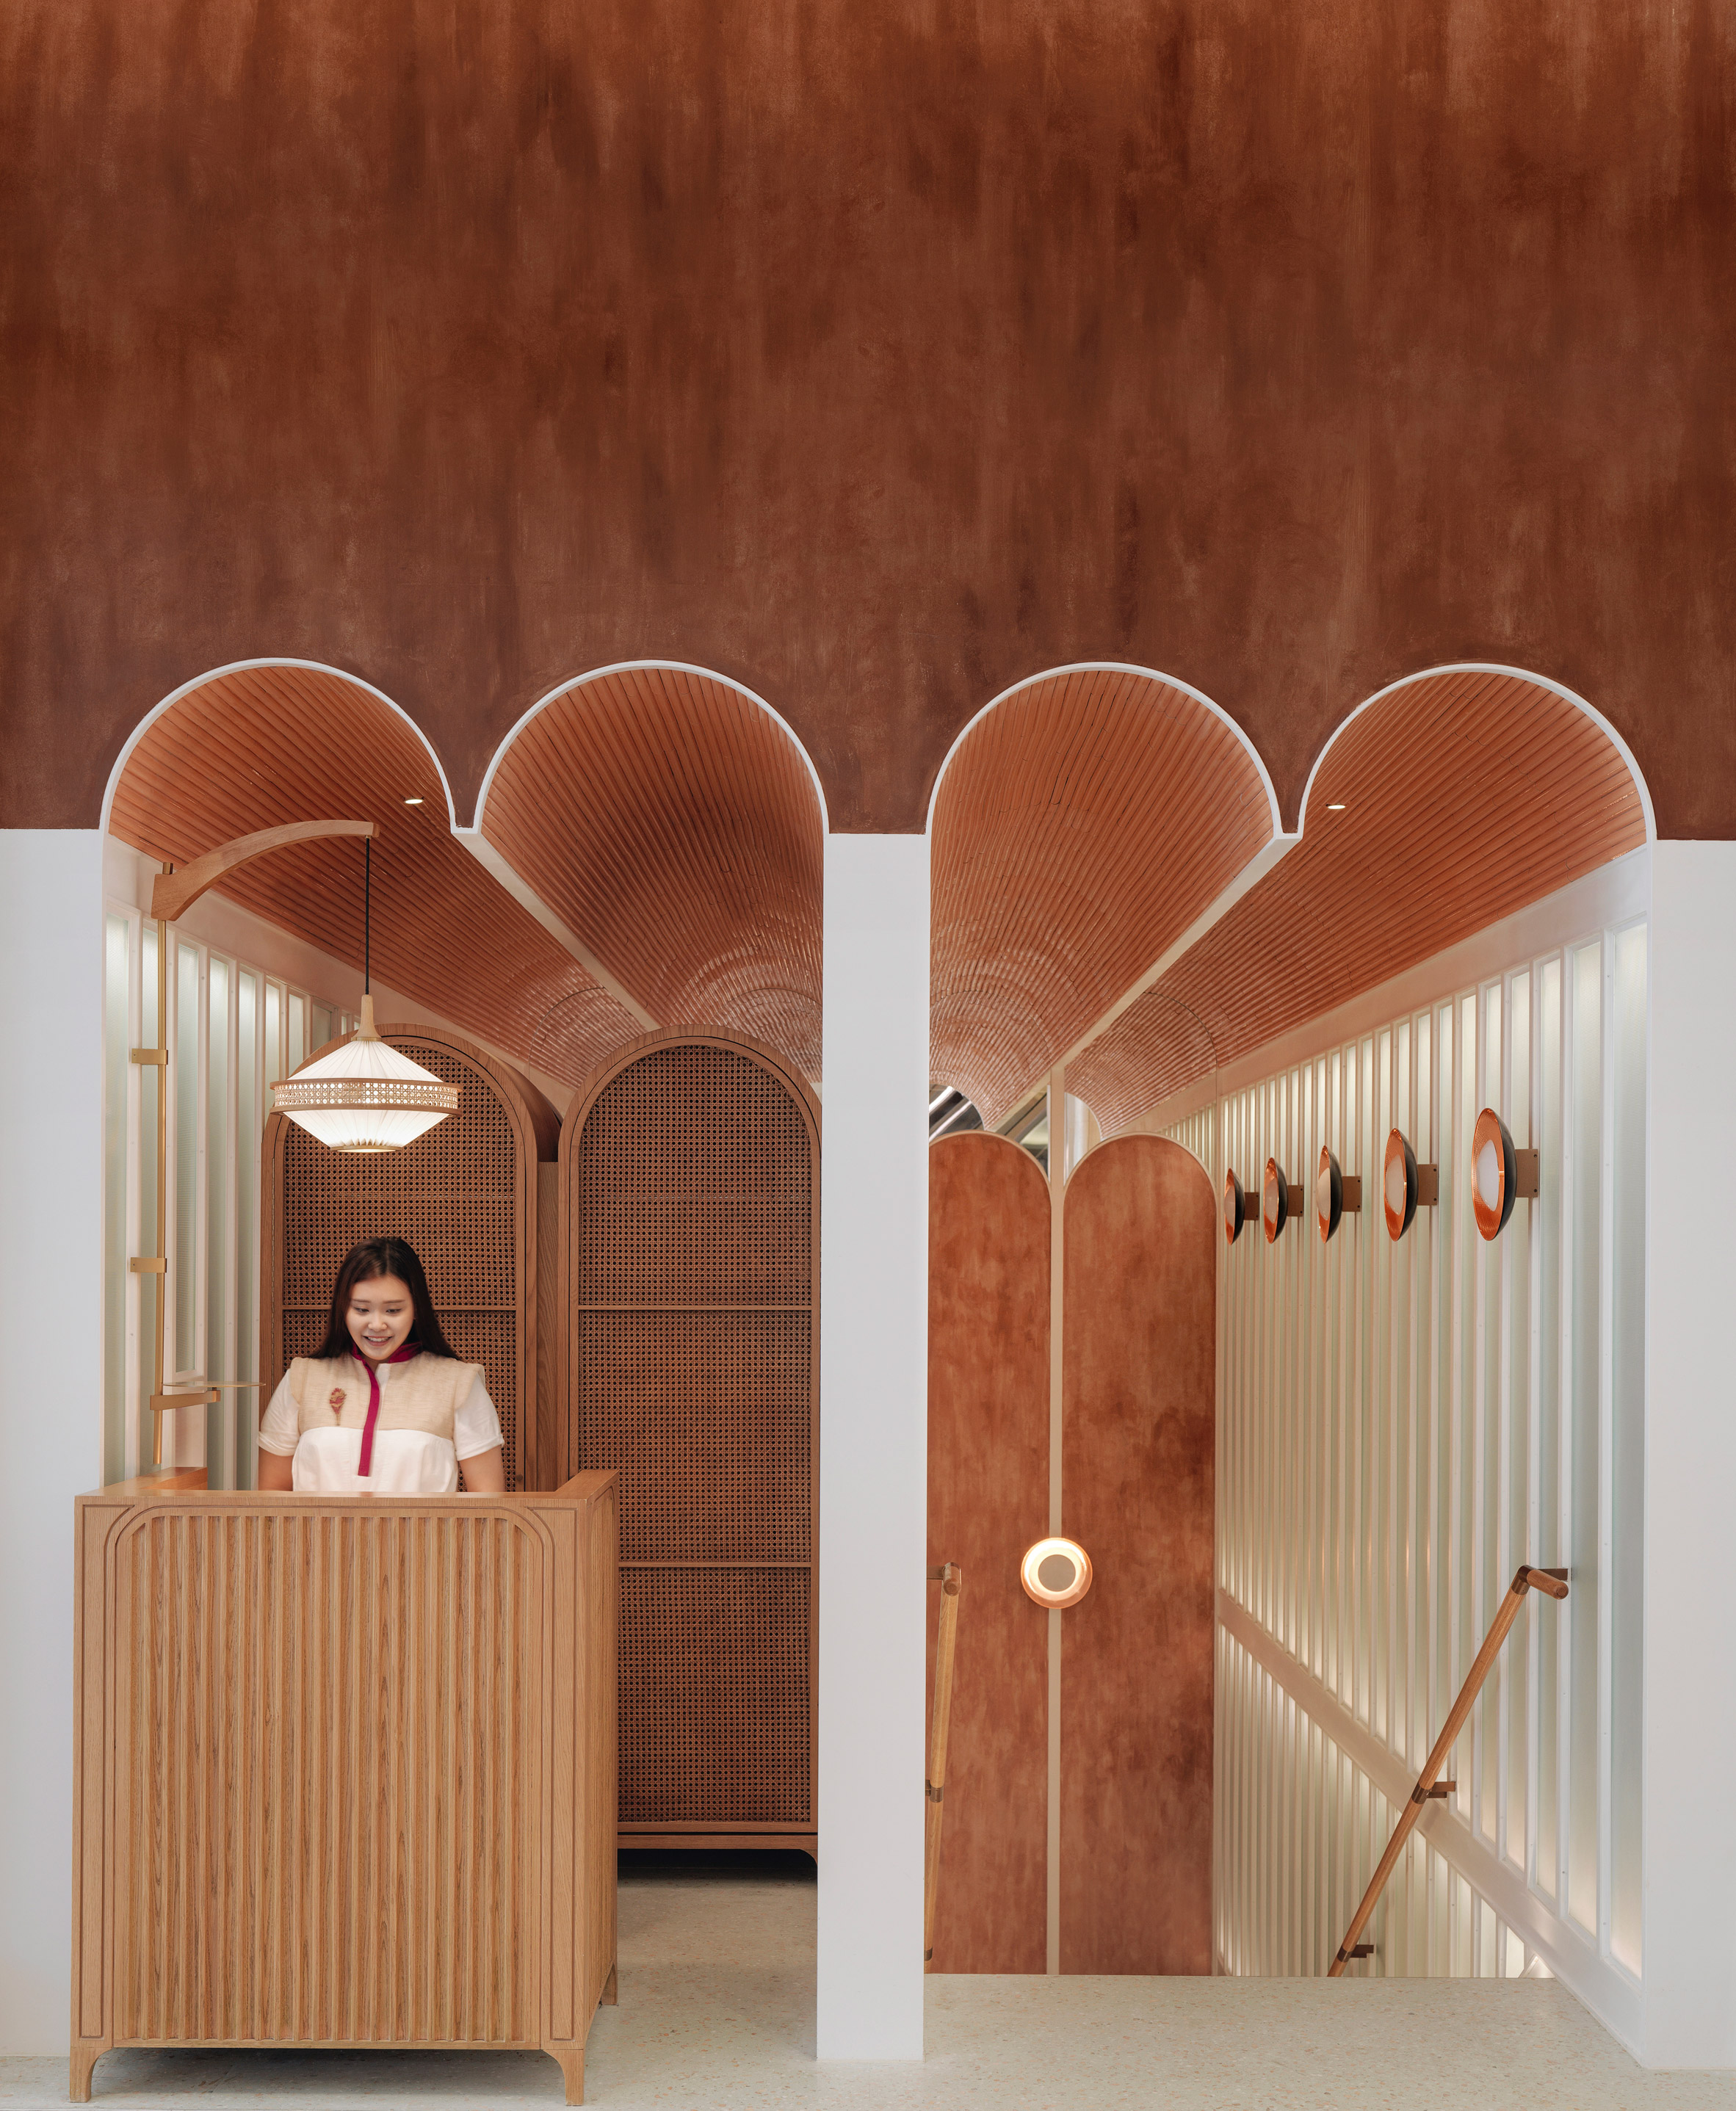 Dim sum restaurant by Linehouse is "British tea hall turned Chinese canteen"